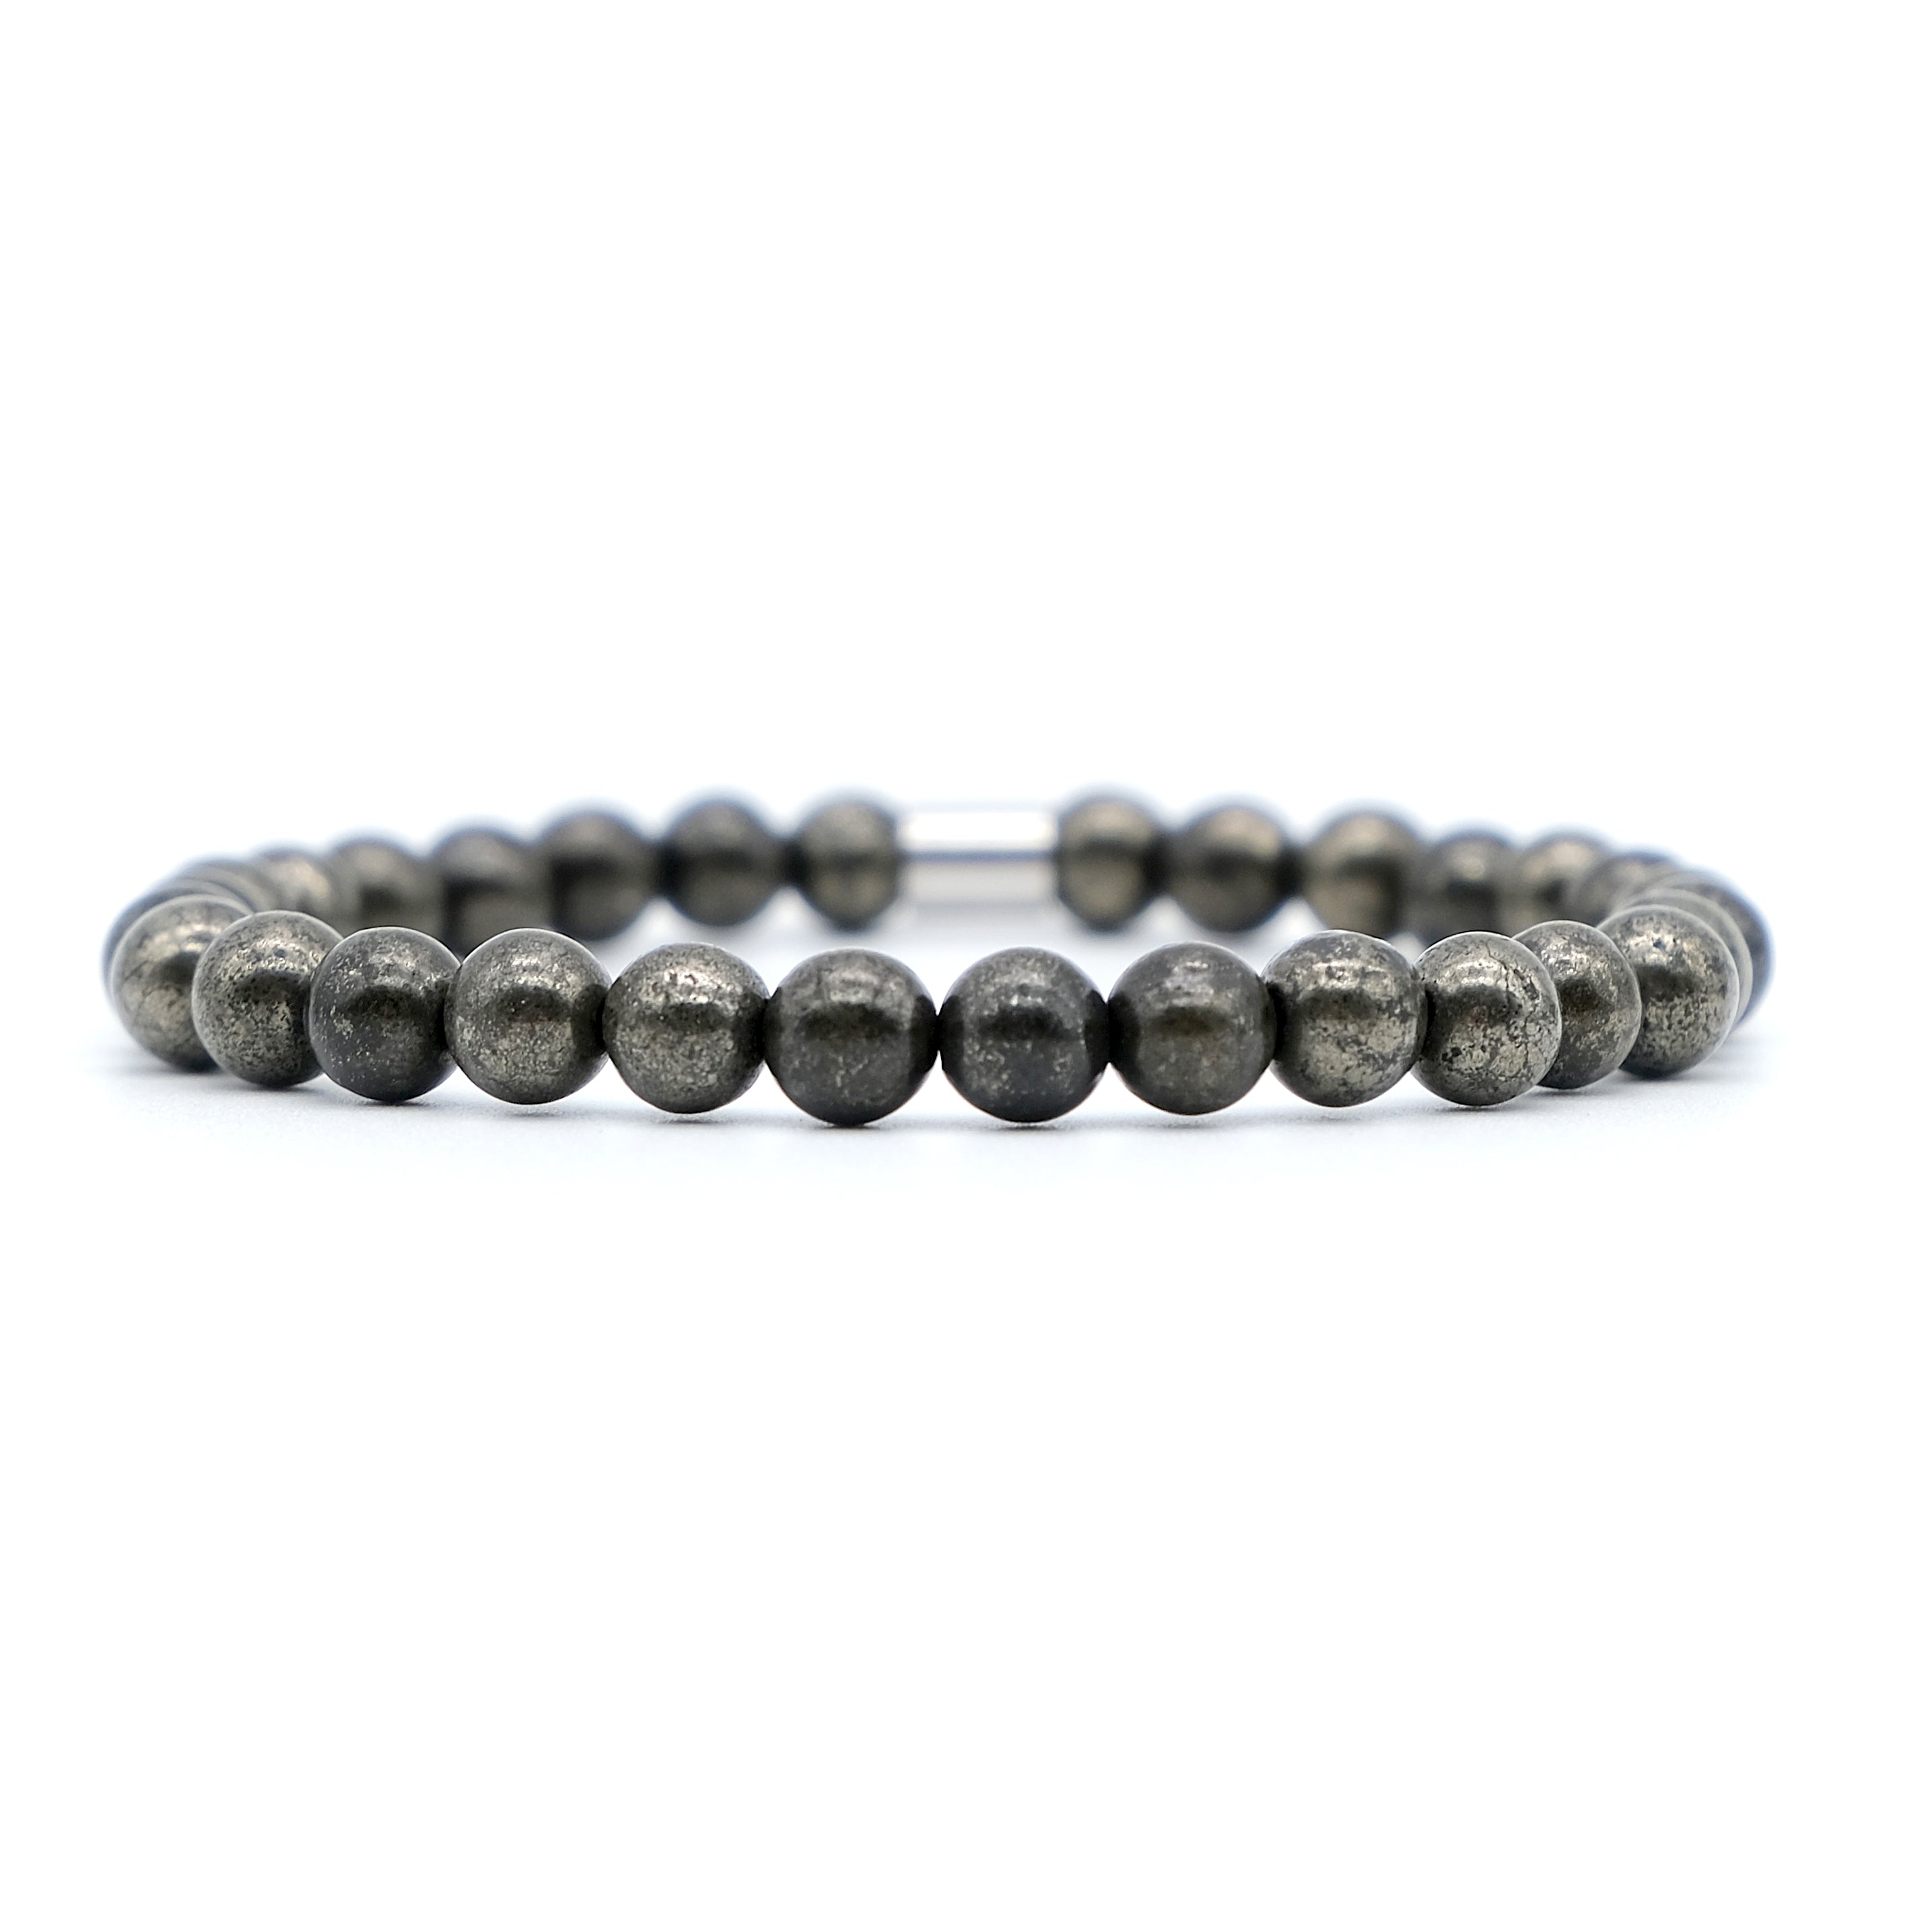 A pyrite gemstone bracelet in 5mm beads with steel accessory